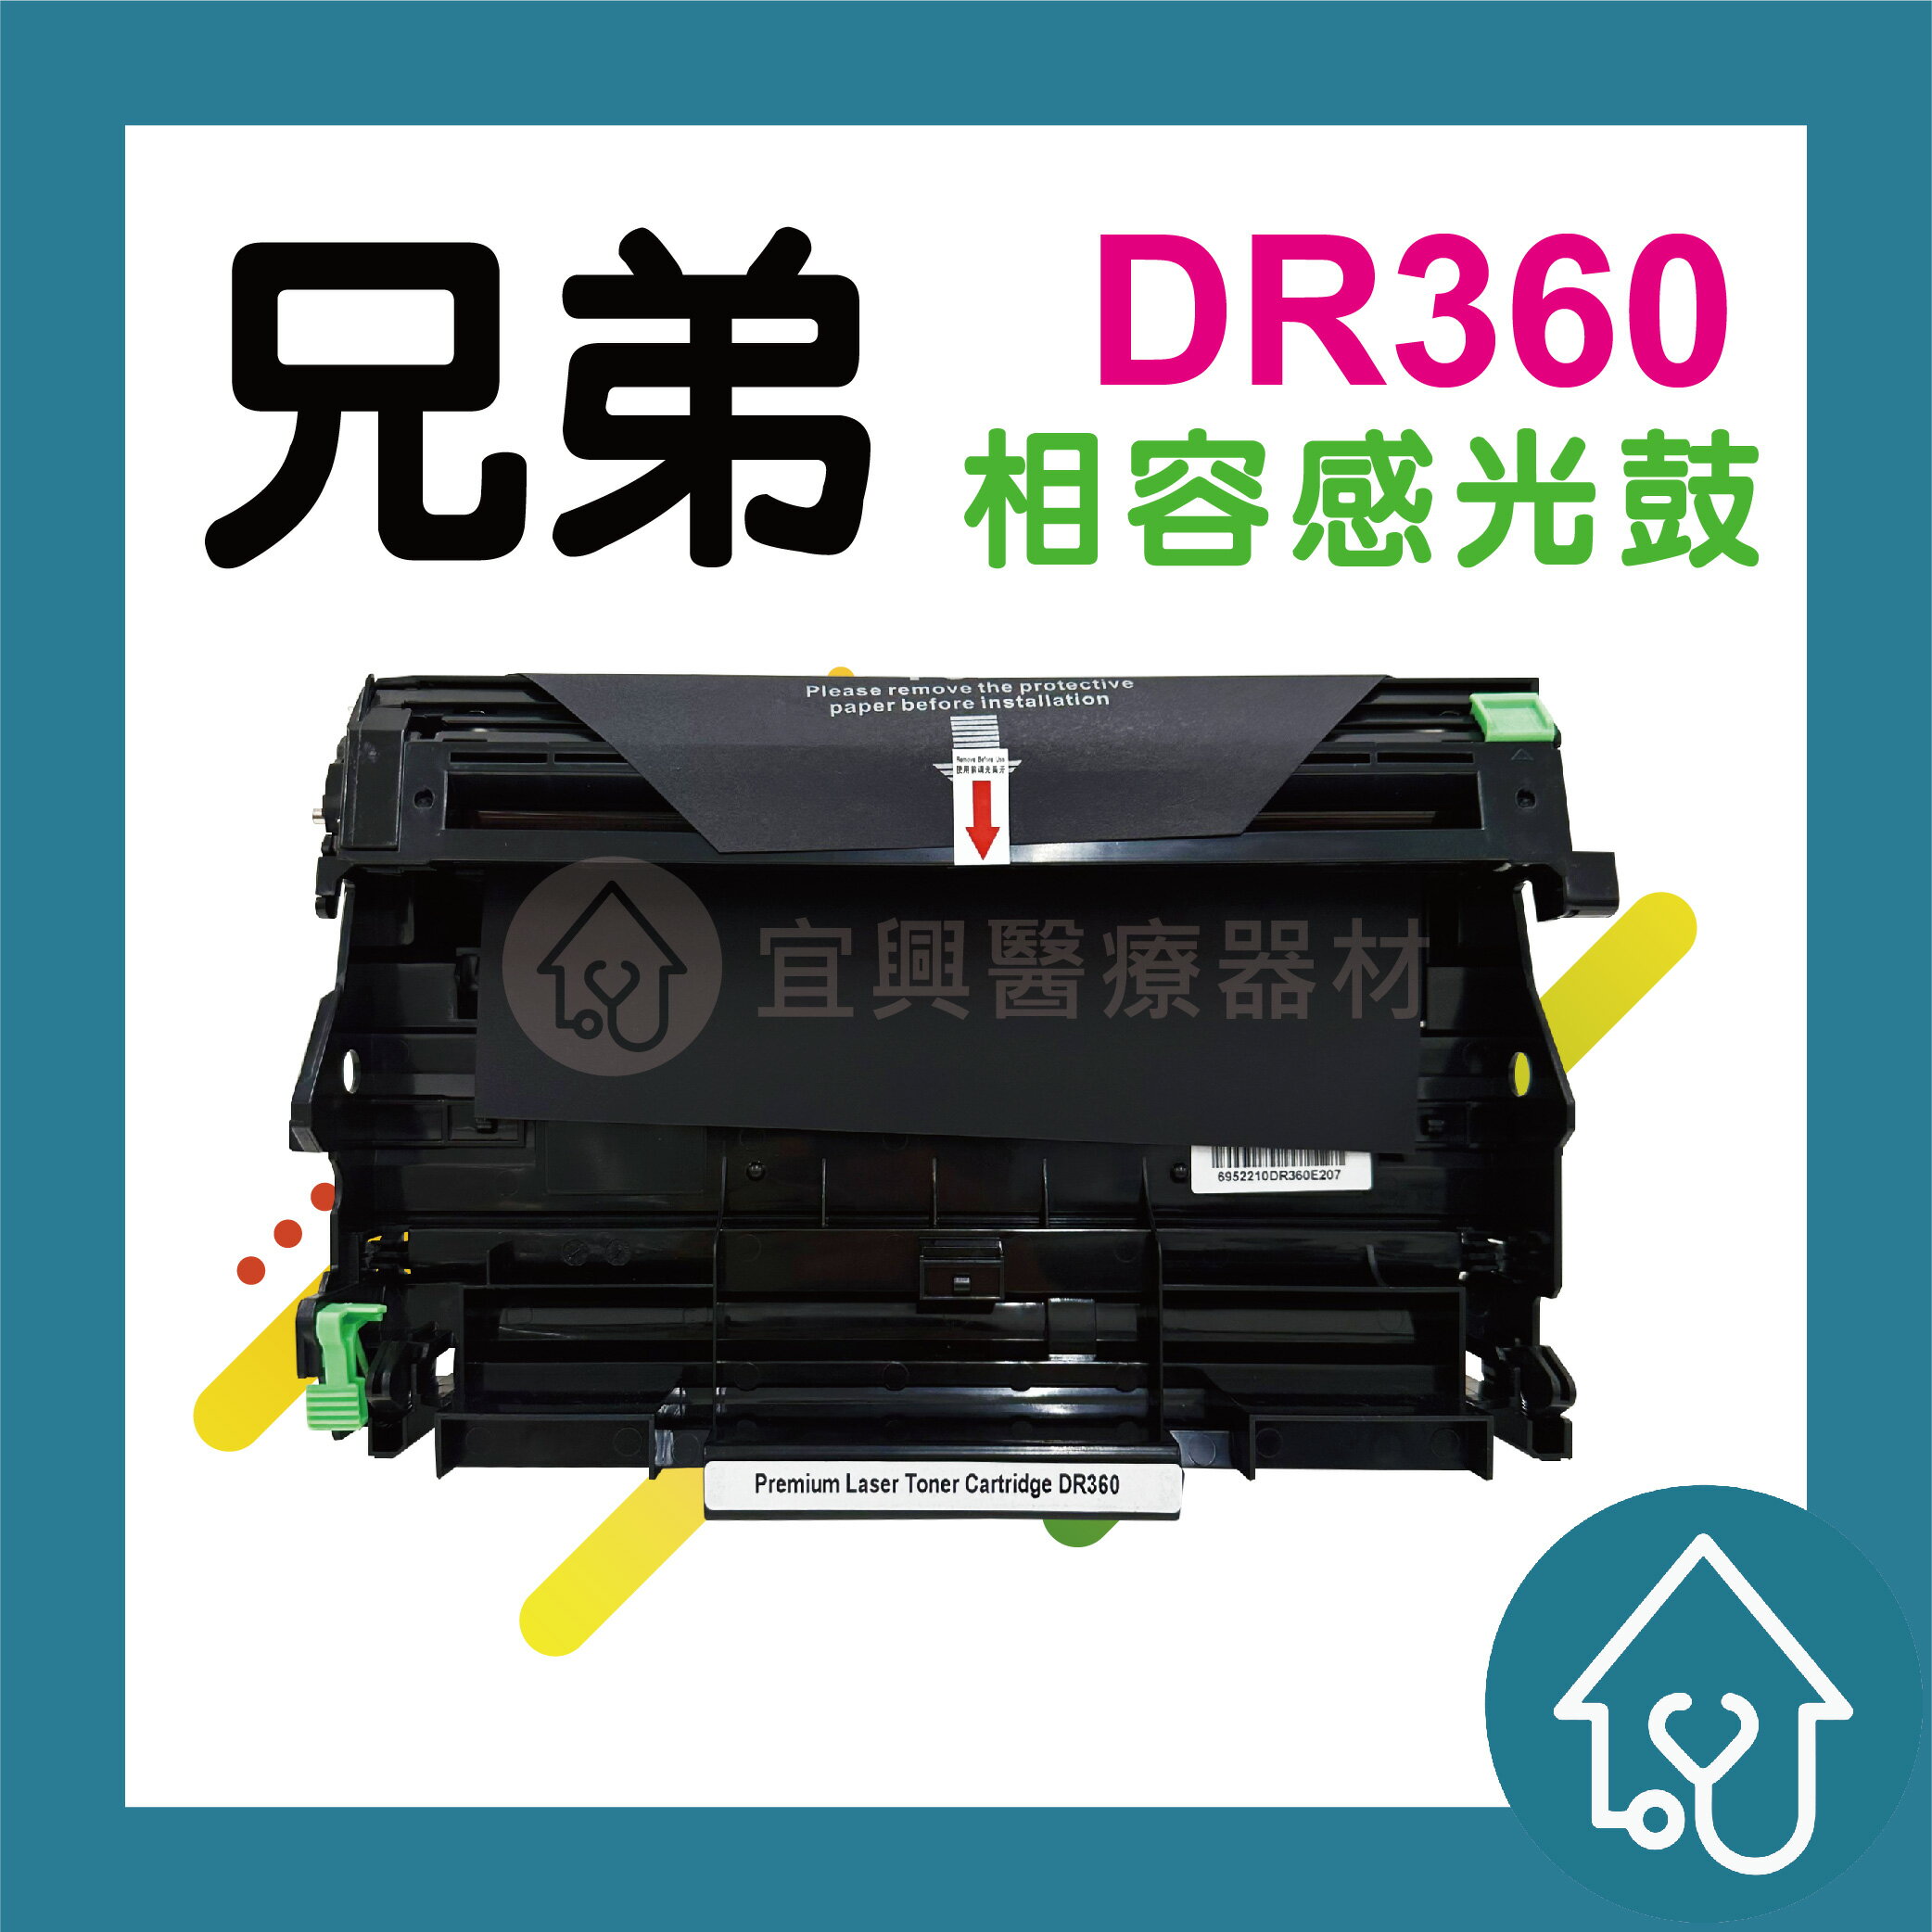 BROTHER DR-360 DR360兄弟 副廠感光滾筒 MFC-7340/DCP-7040/HL-2170W/DCP-7030/2140/7440N